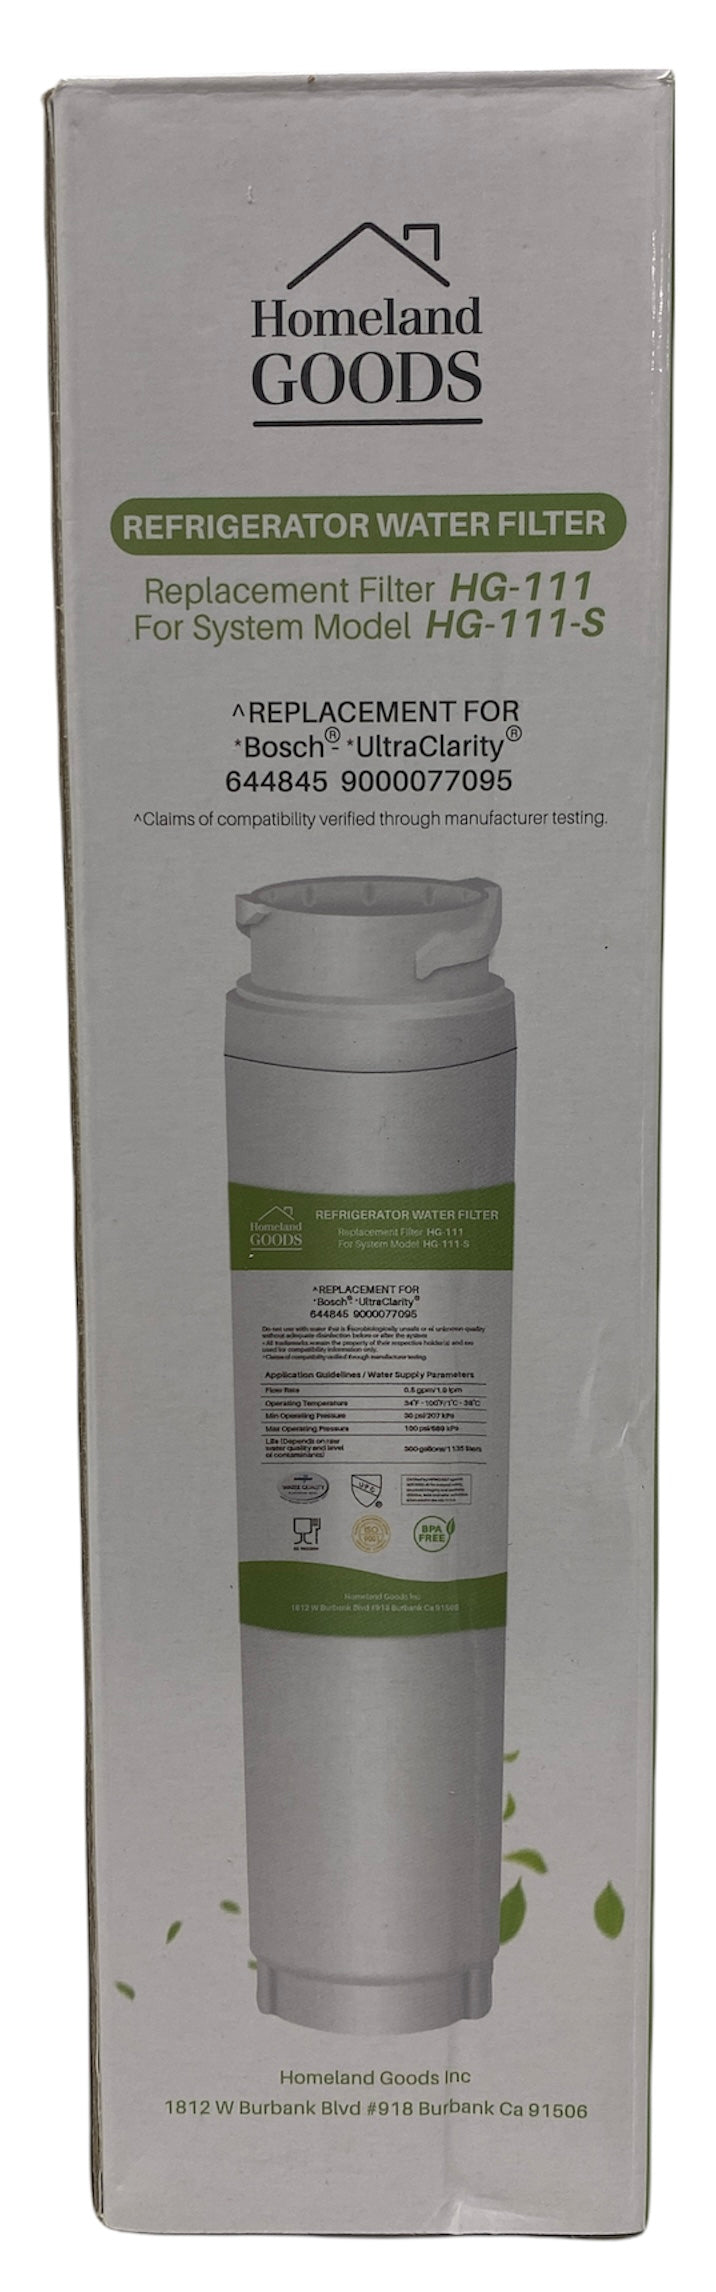 RWF3100A Refrigerator Water Filter IAPMO Certified Replacement for Bosch Ultra Clarity, 644845, 9000077104, 9000194412, 644845, 9000 077104, B26FT70SNS, Haier 0060820860, 0060218744, Miele KWF1000 Refrigerator Water Filter